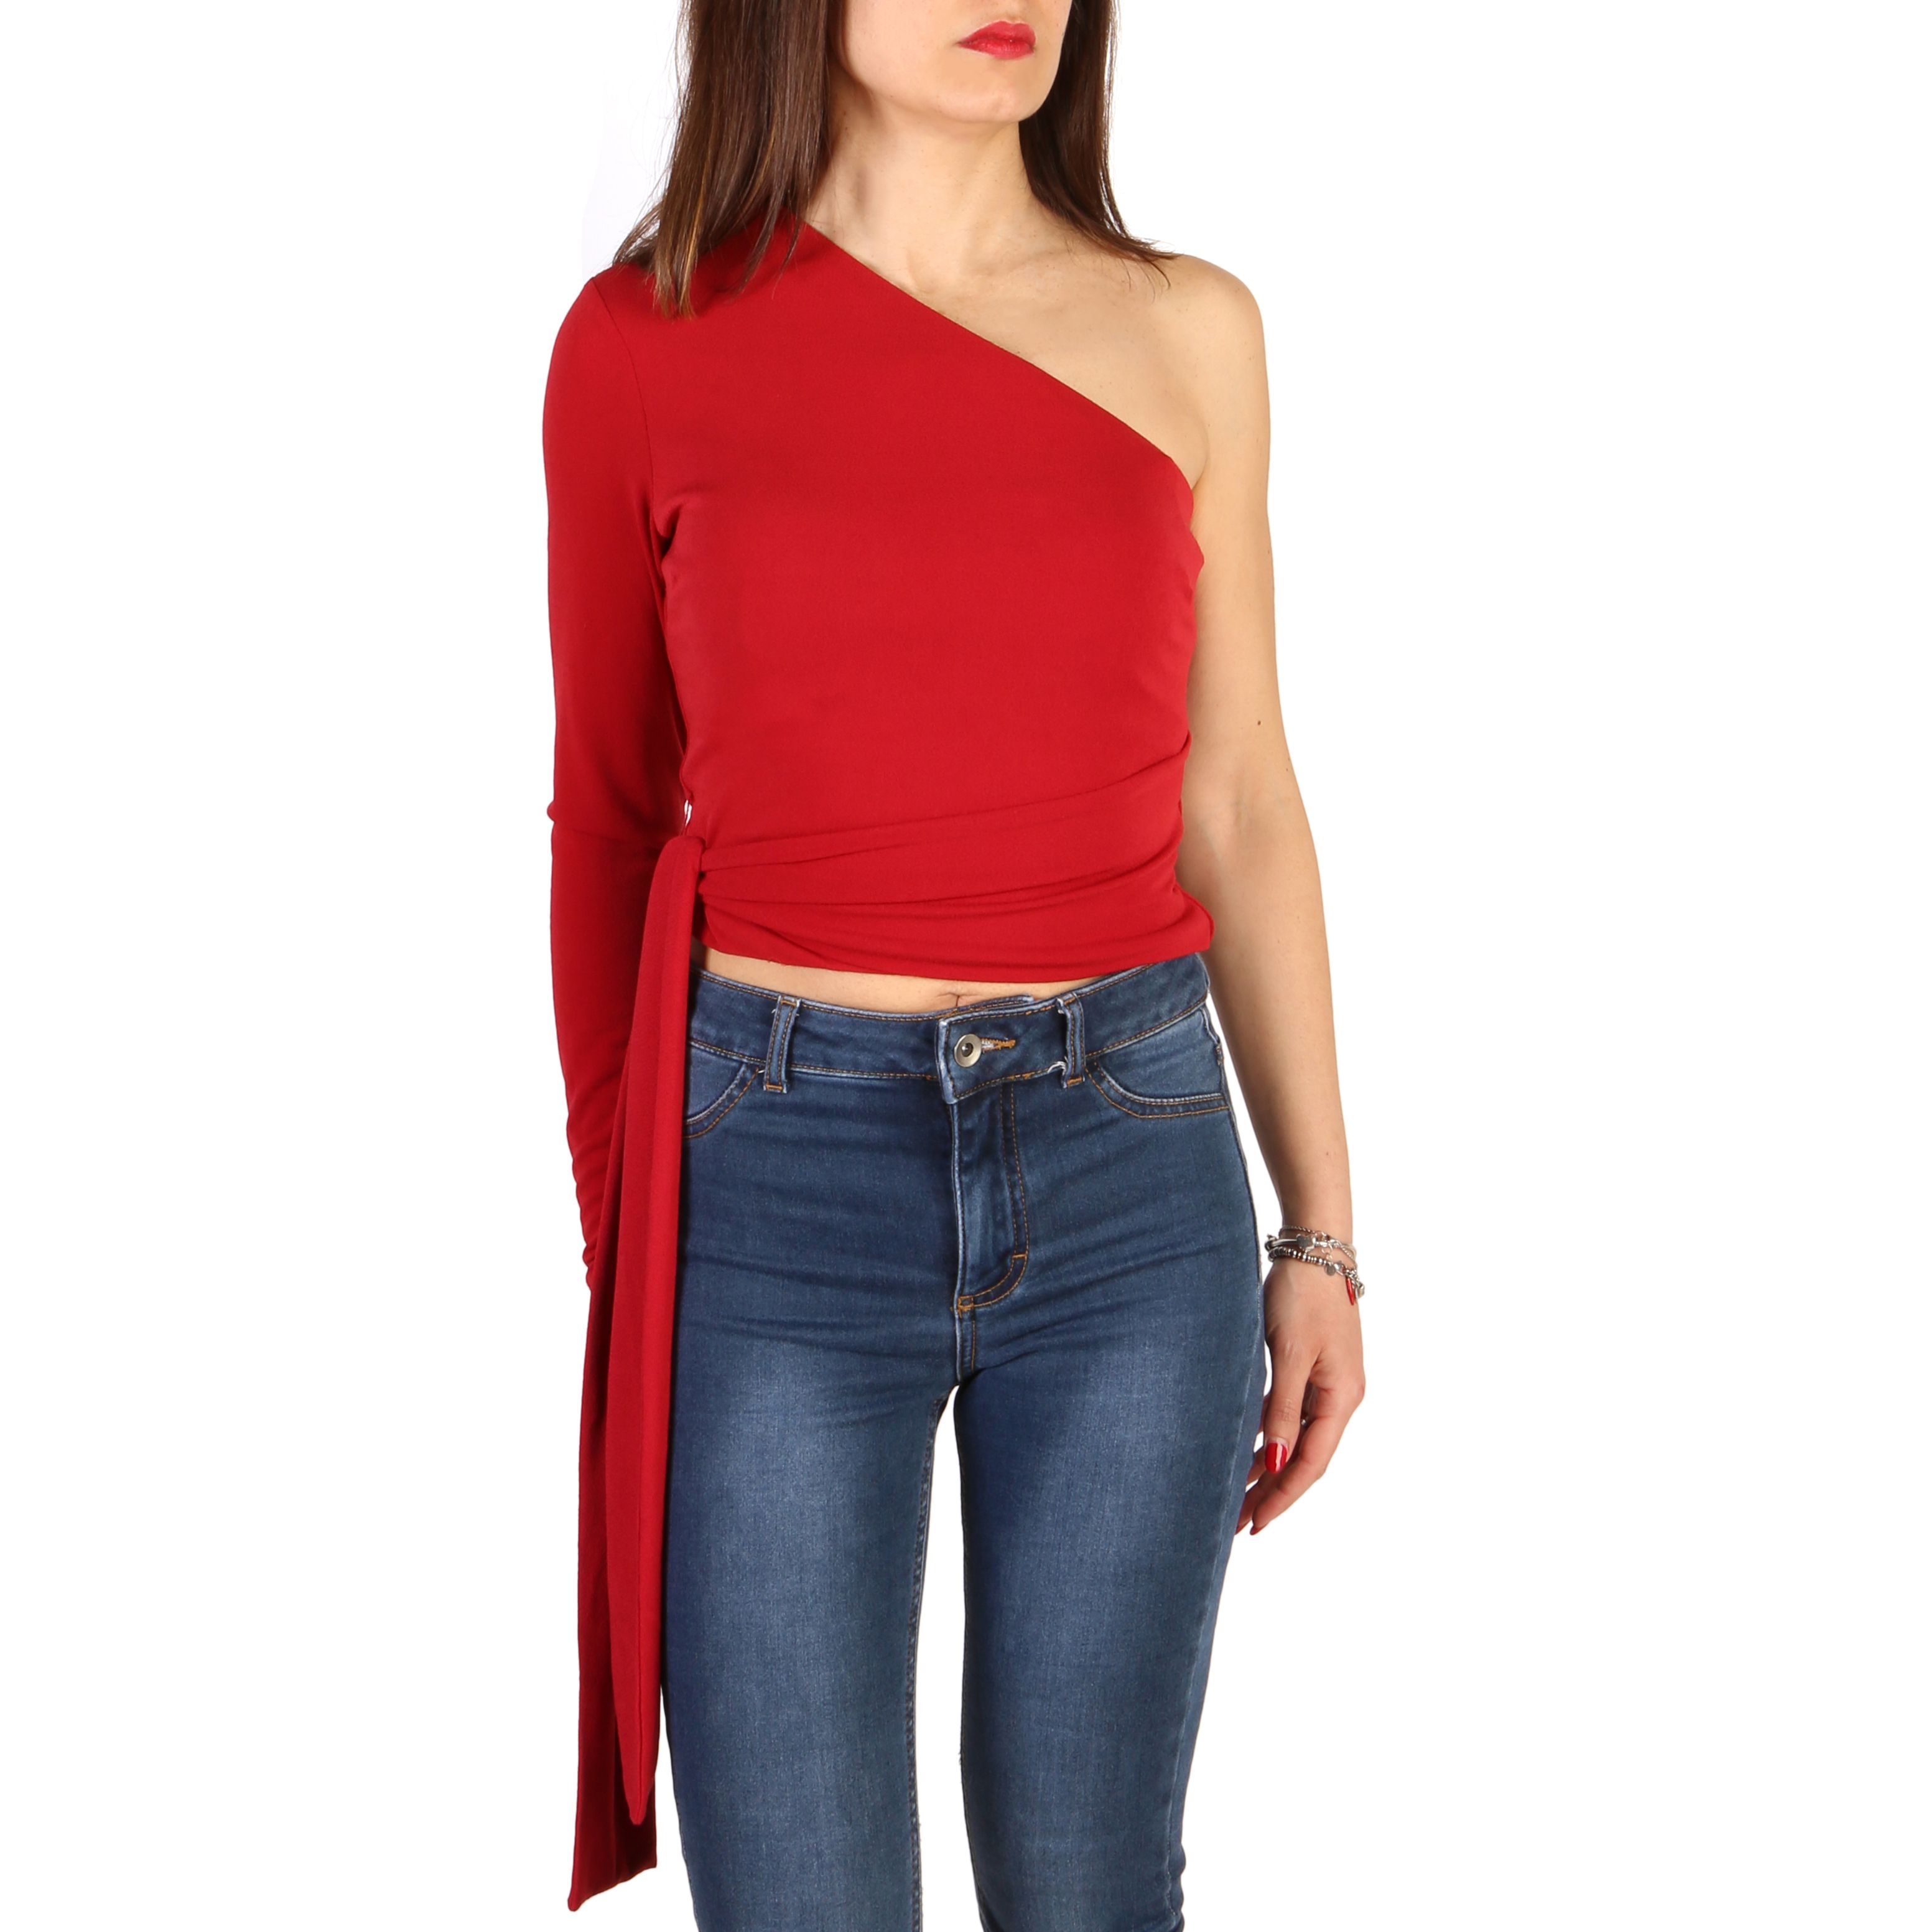 Collection: Spring/Summer
Gender: Woman
Type: Sweater
Sleeves: long
Neckline: wide
Material: elastane 5%, polyester 95%
Pattern: solid colour
Washing: hand wash
Model height, cm: 176
Model wears a size: S
Inside: unlined